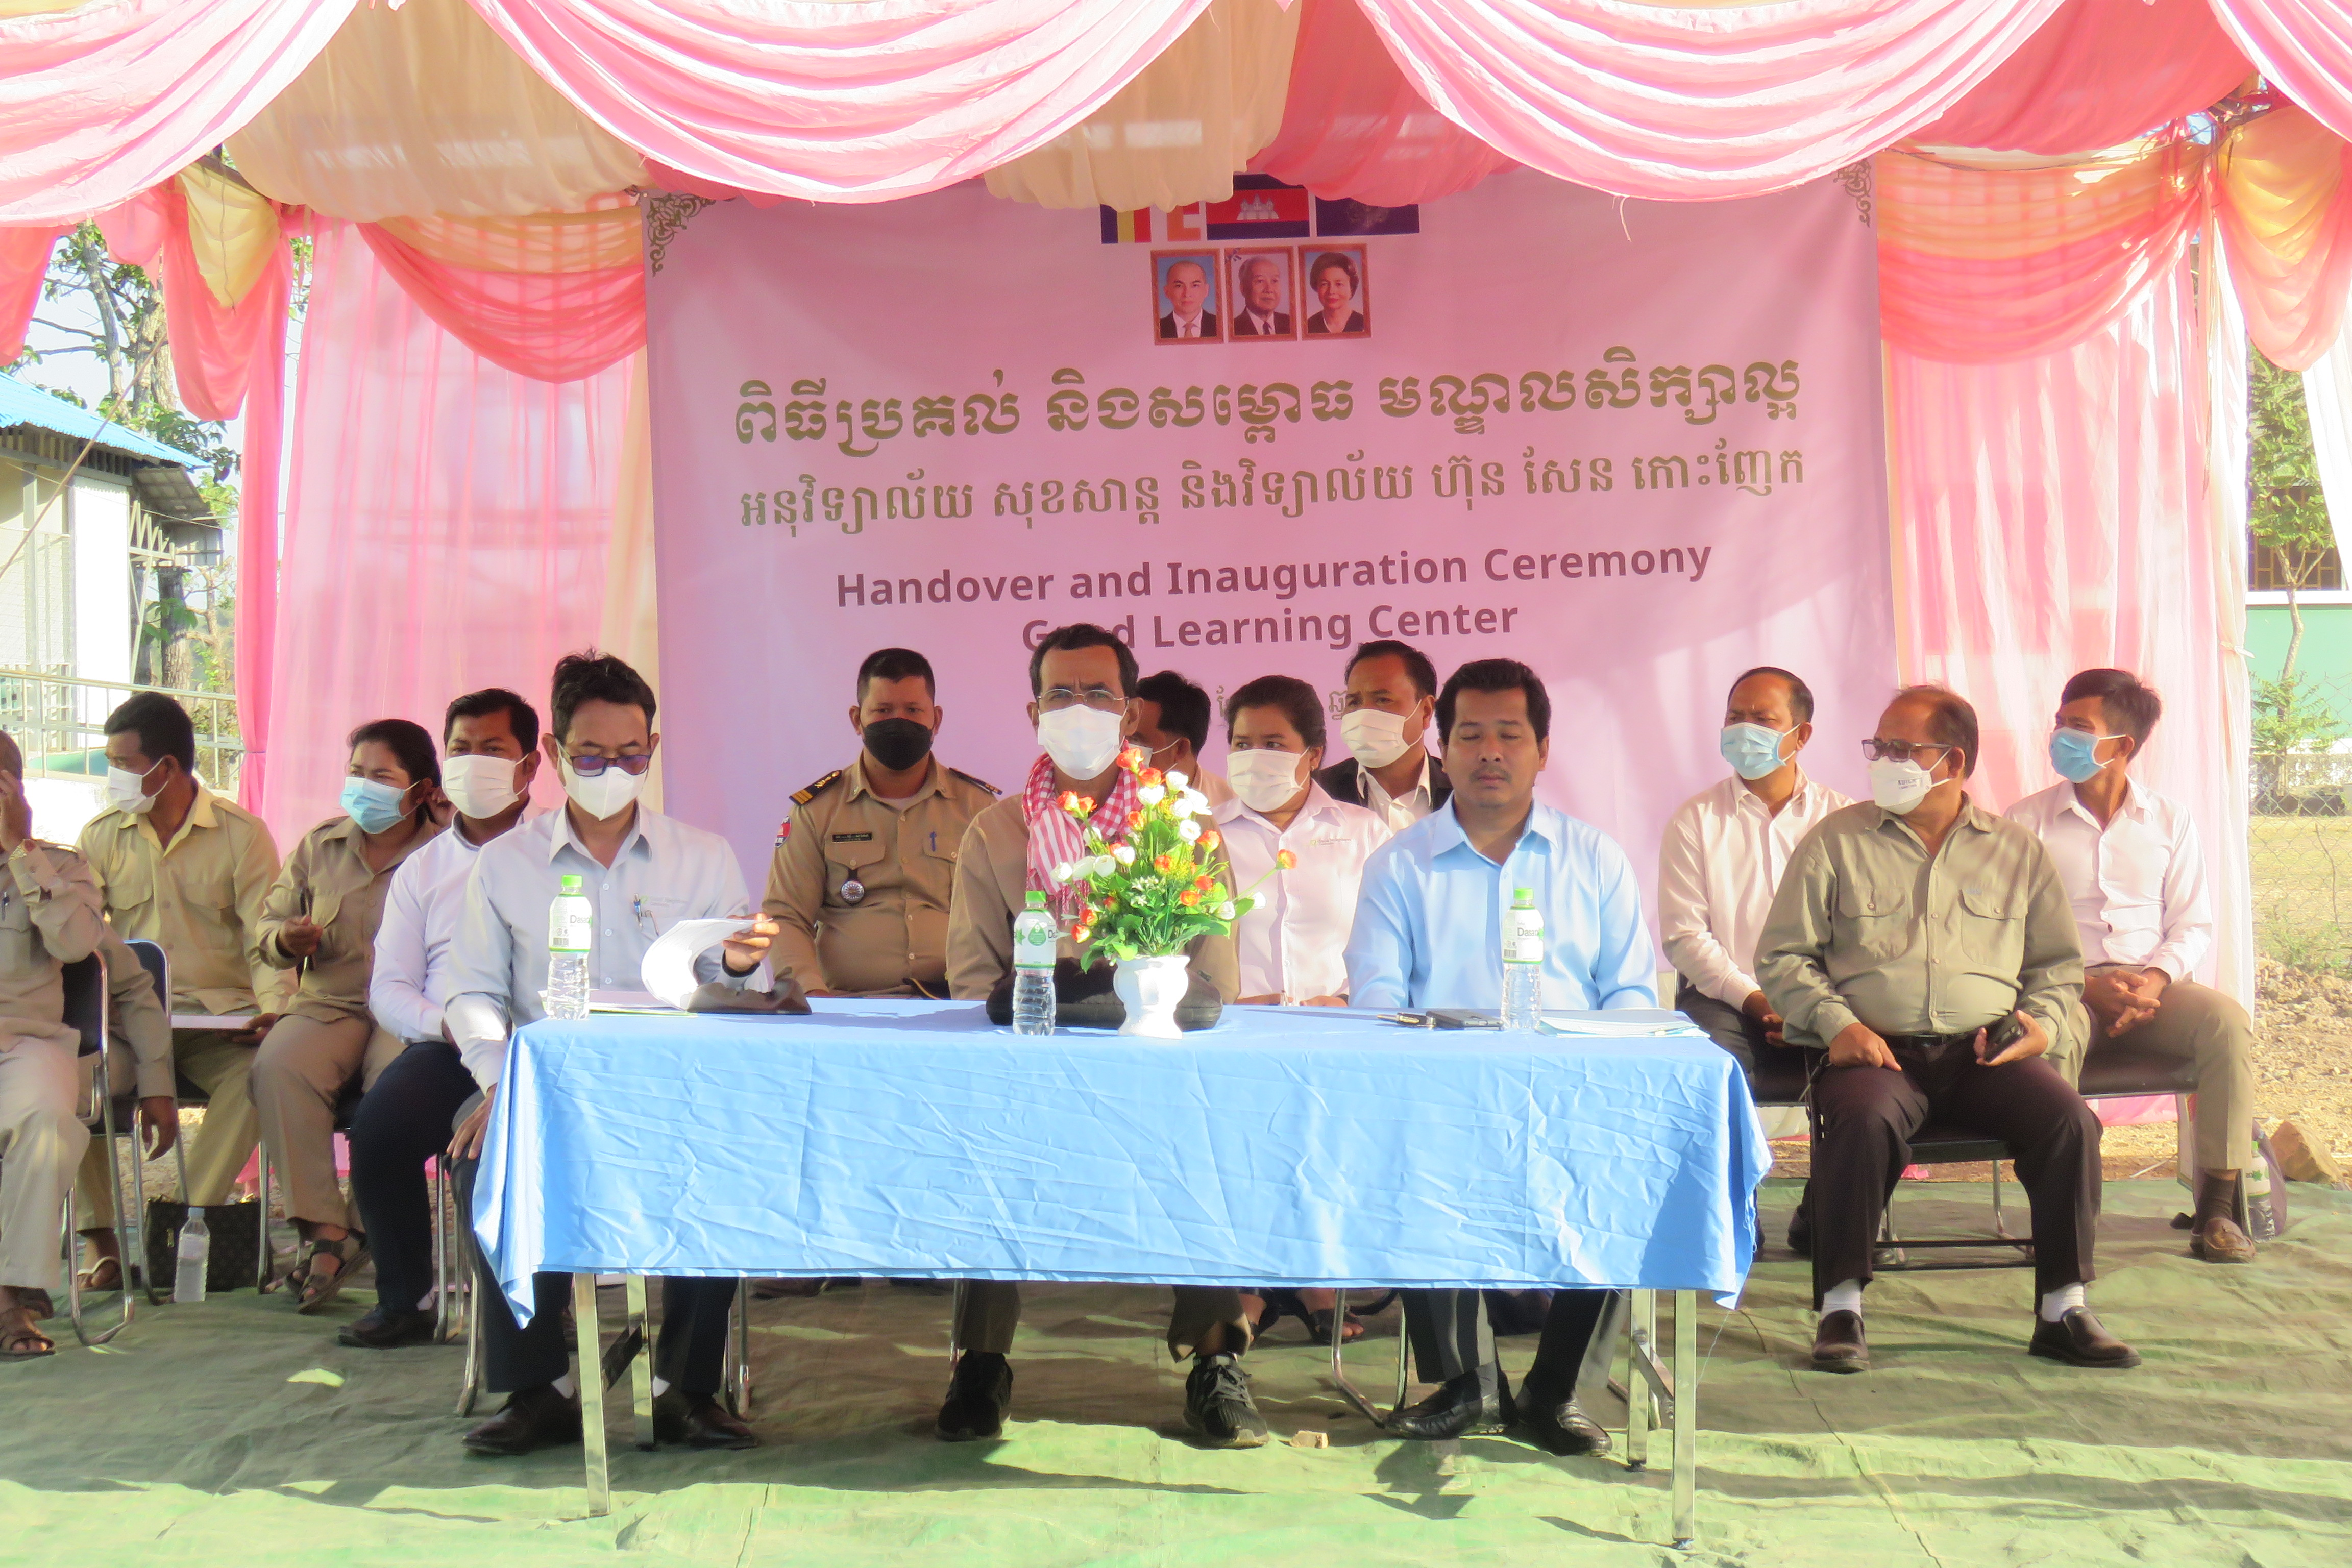 Handover and Inauguration Ceremony of Two Good Learning Centers in Koh Nheaek District